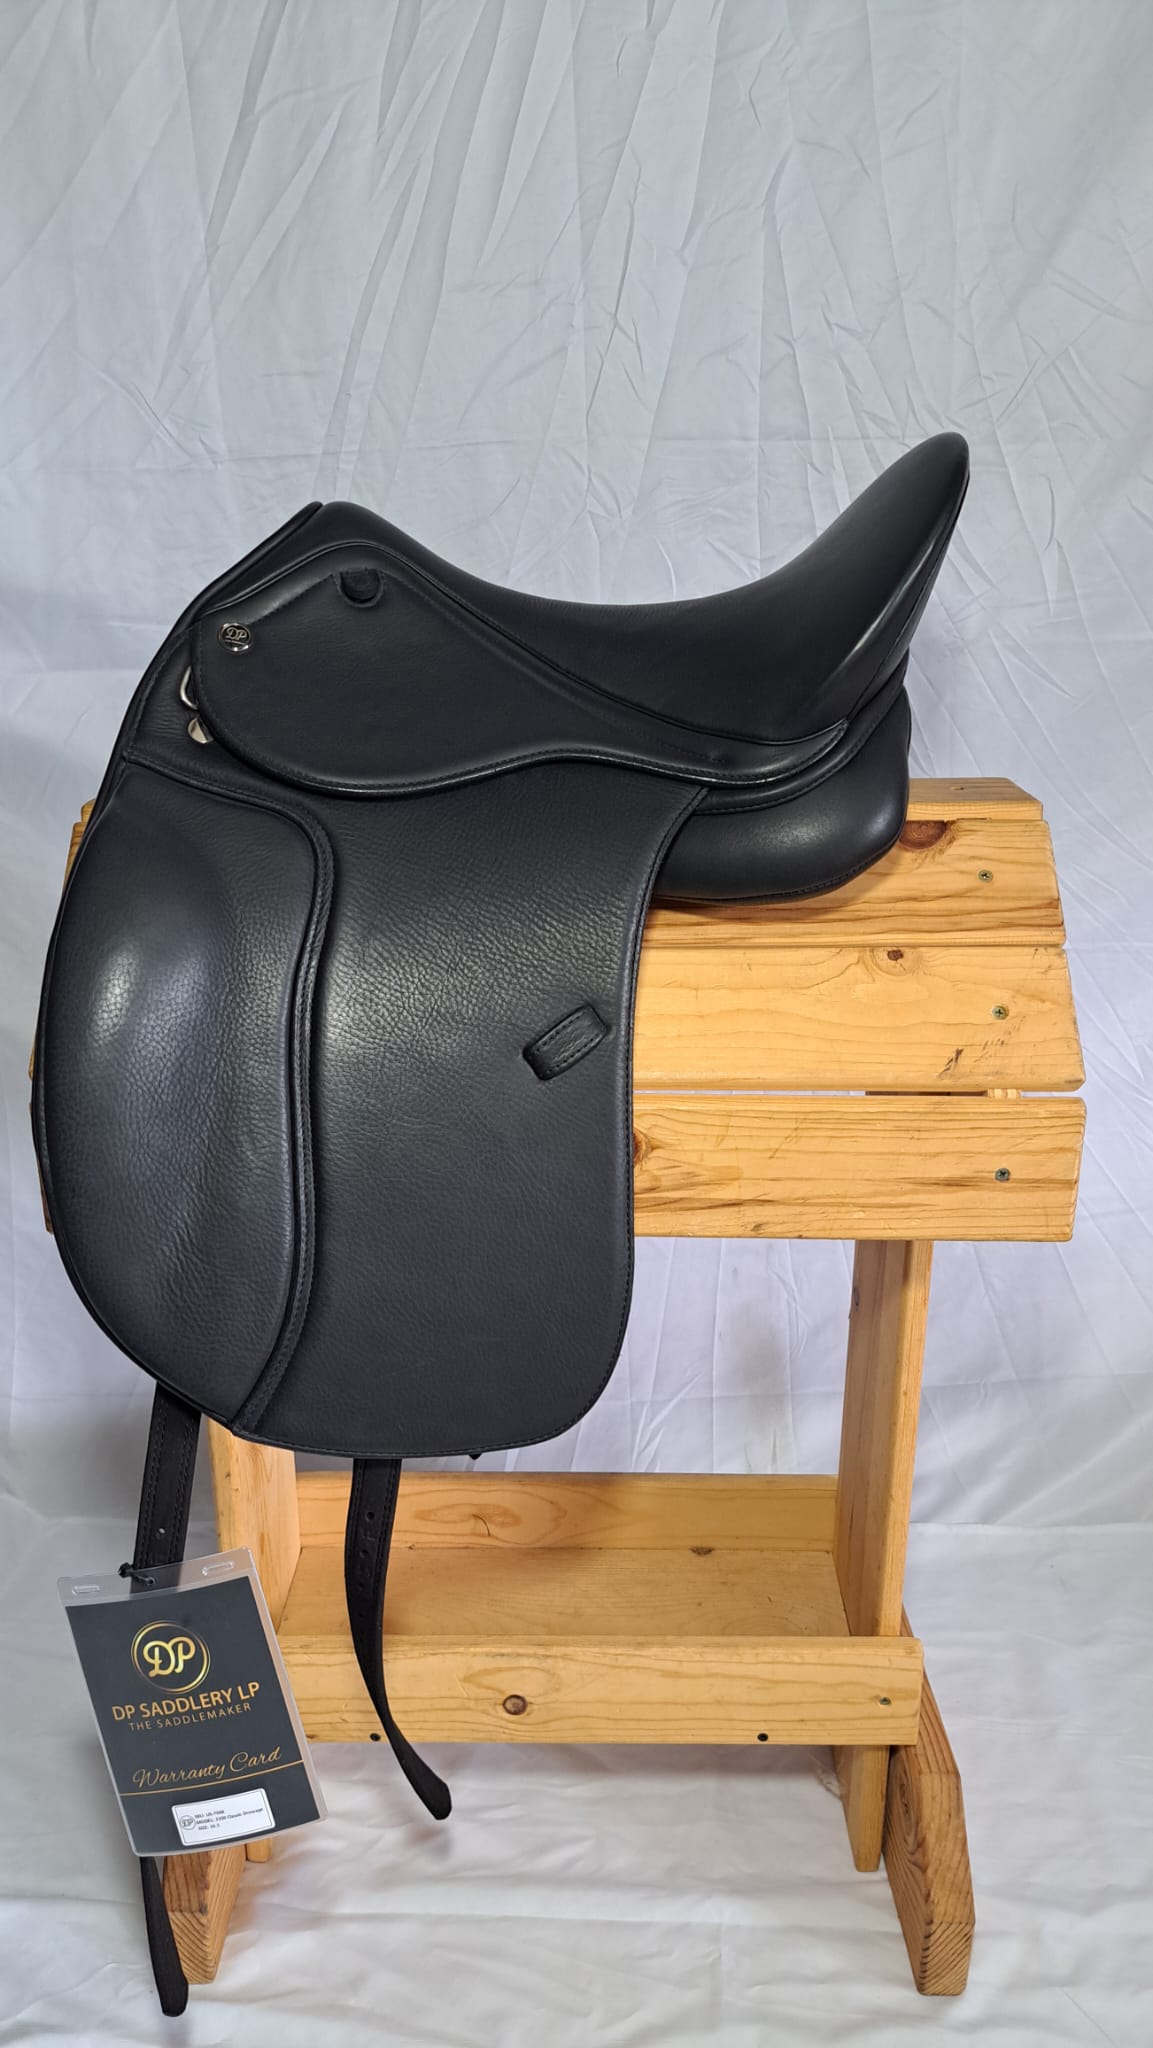 DP Saddlery Classic Dressage 7088 16.5 in